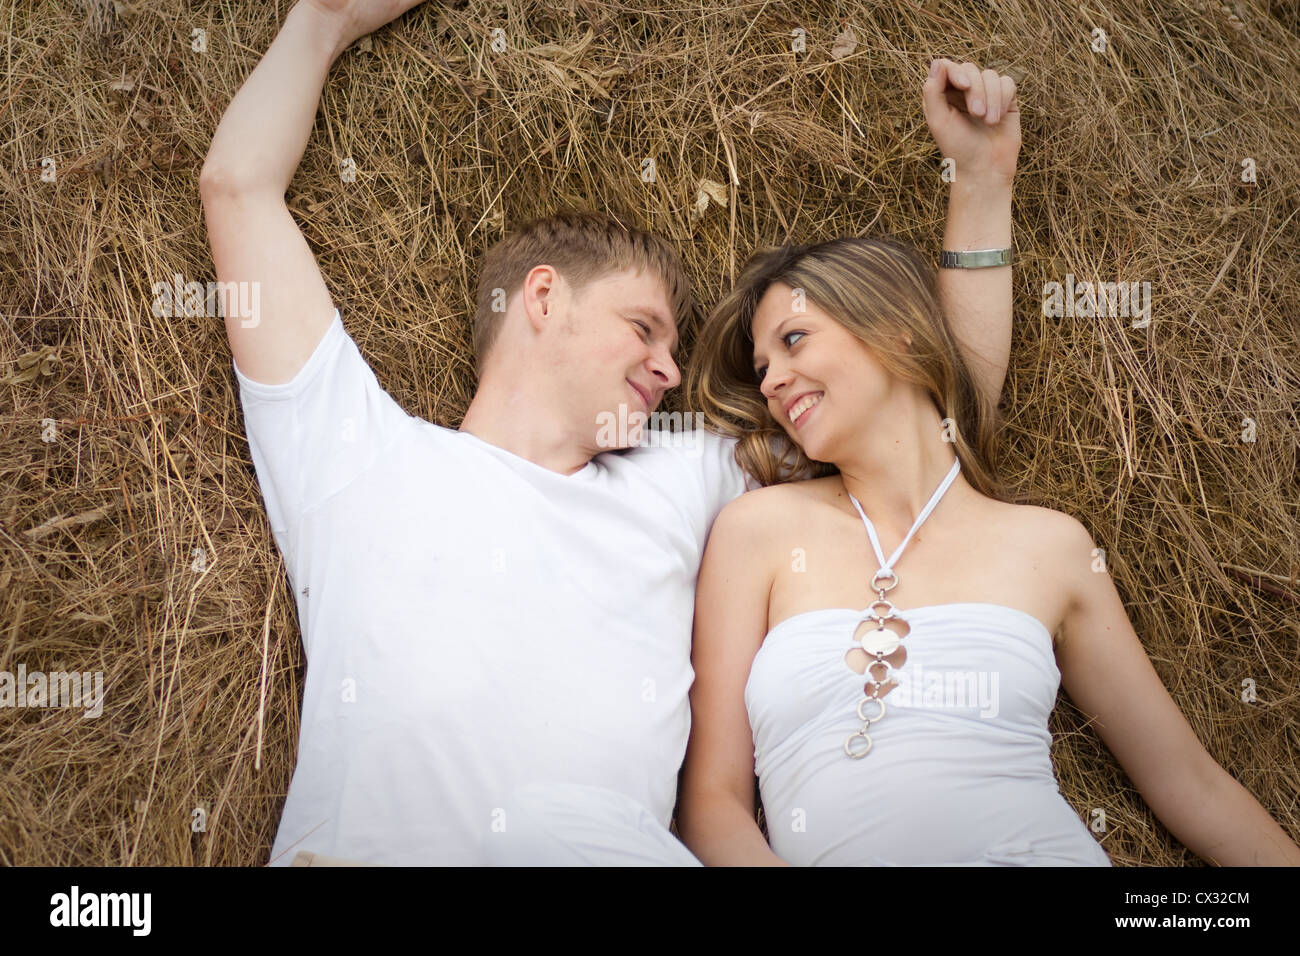 Happy young couple lying together dans haystack Banque D'Images